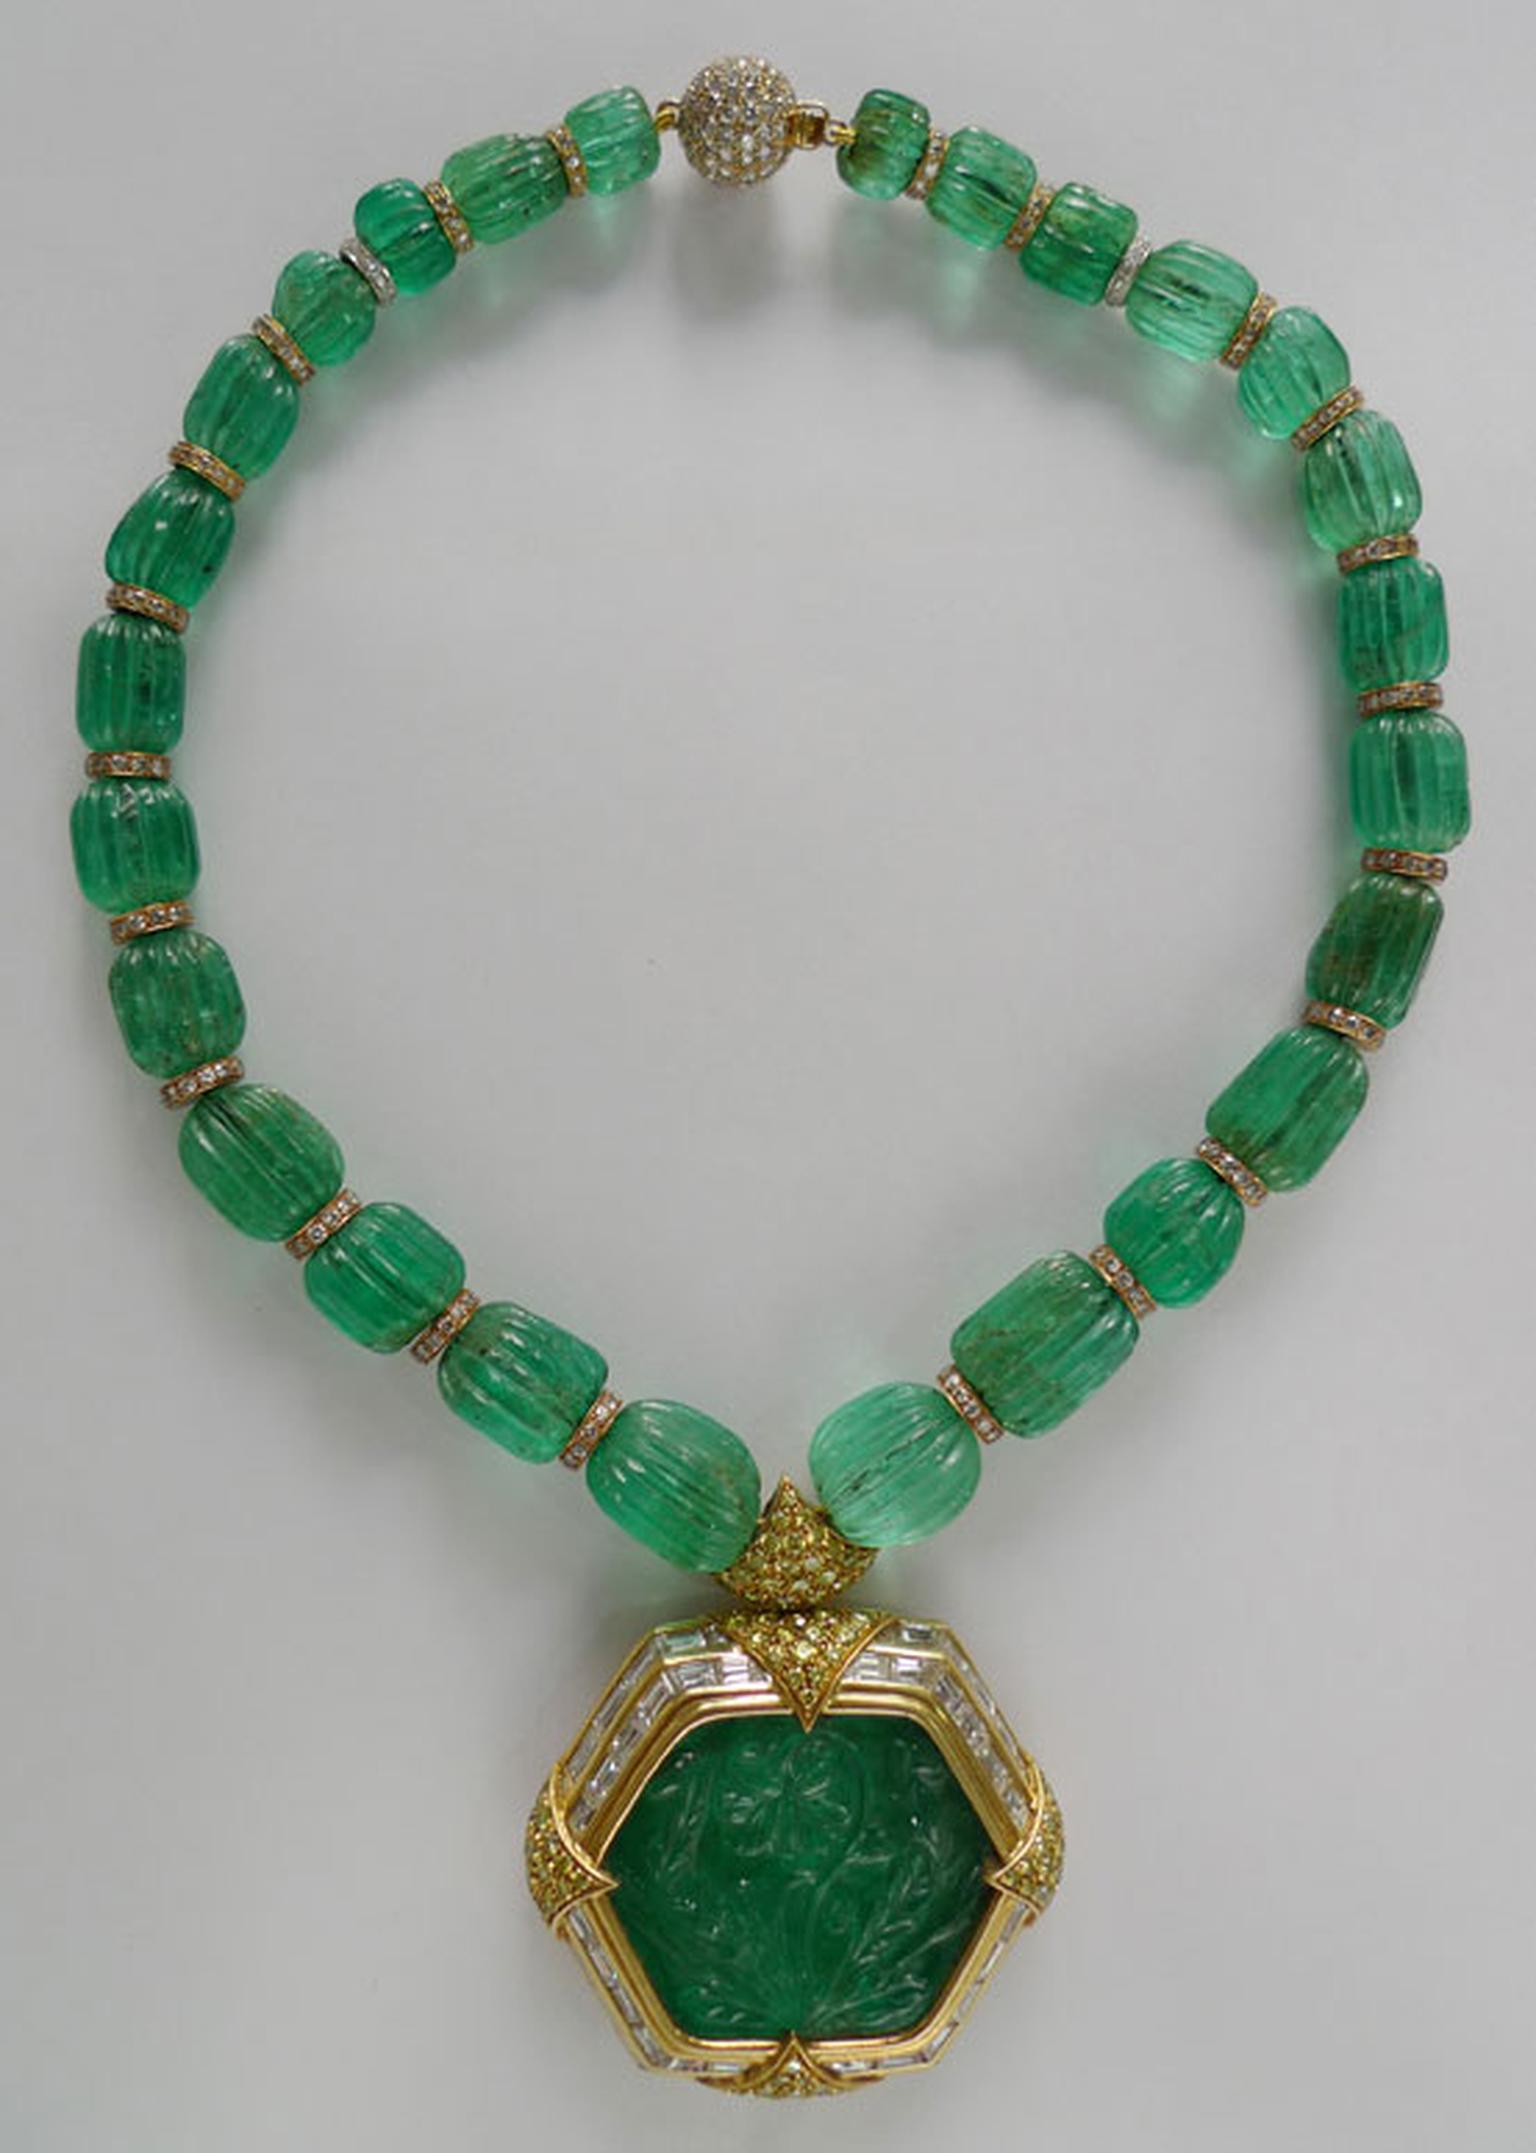 Gem Palace emerald necklace featuring a central carved emerald.